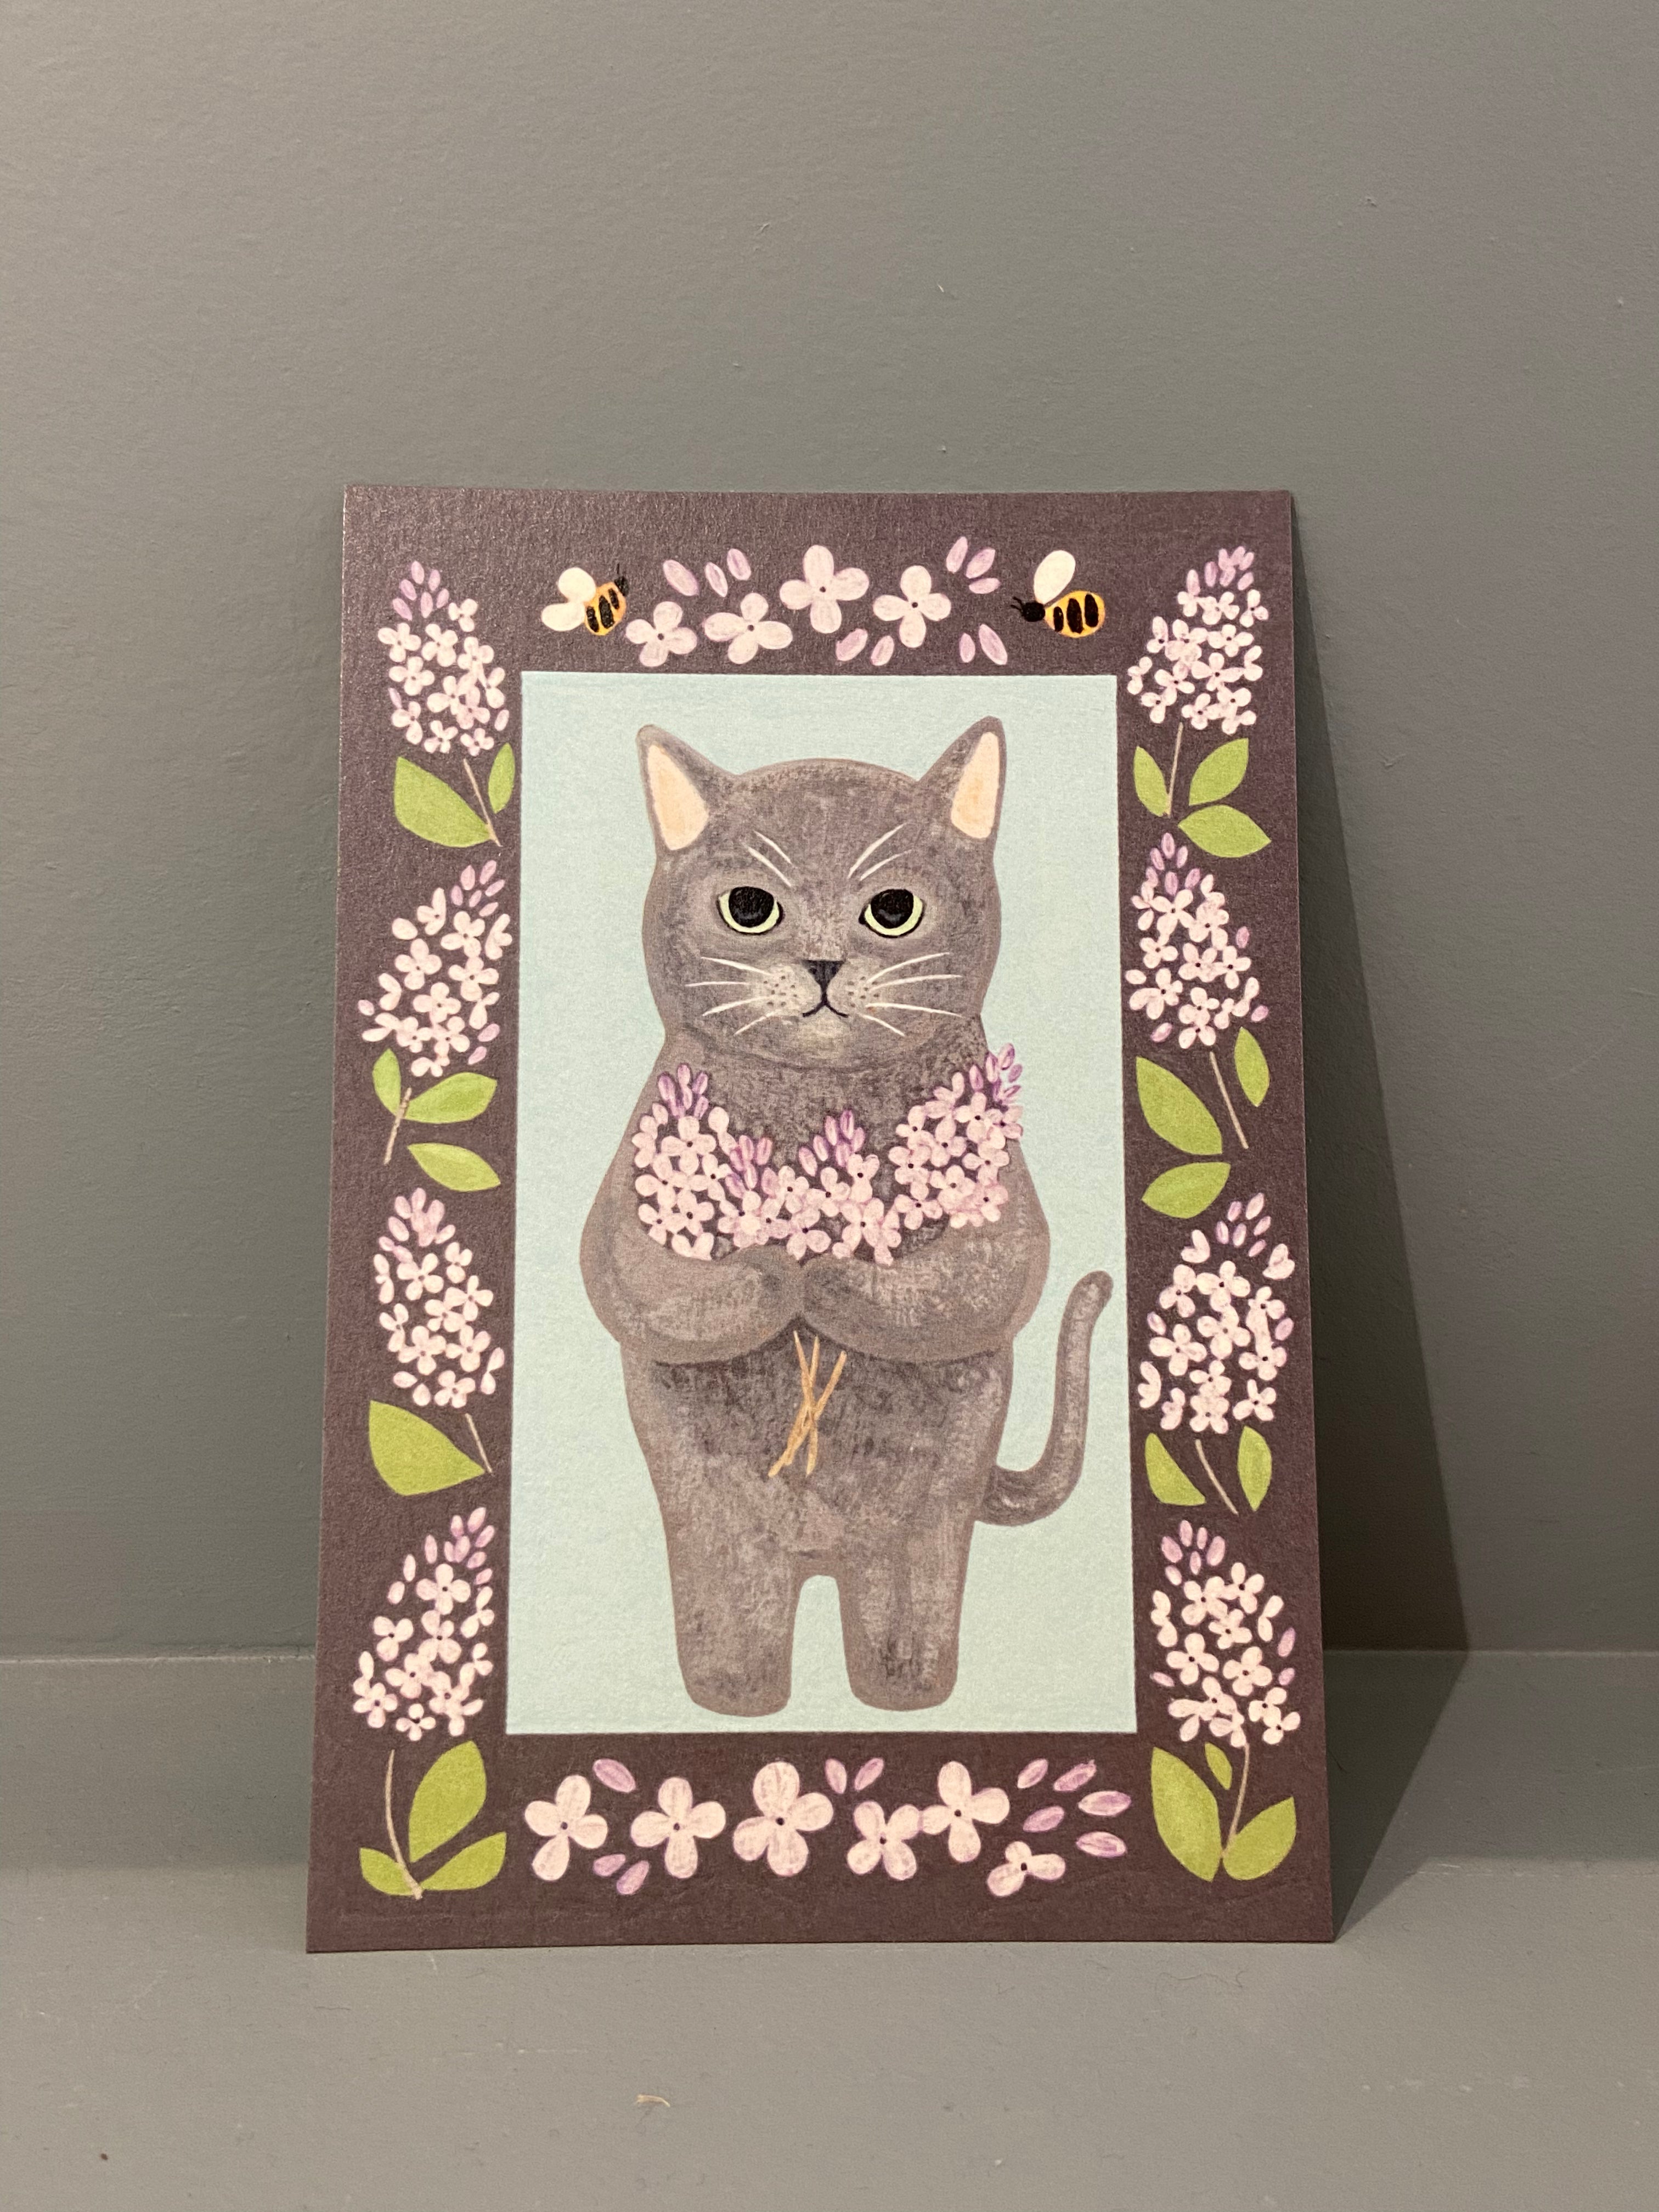 Postcard - Gray cat with flowers